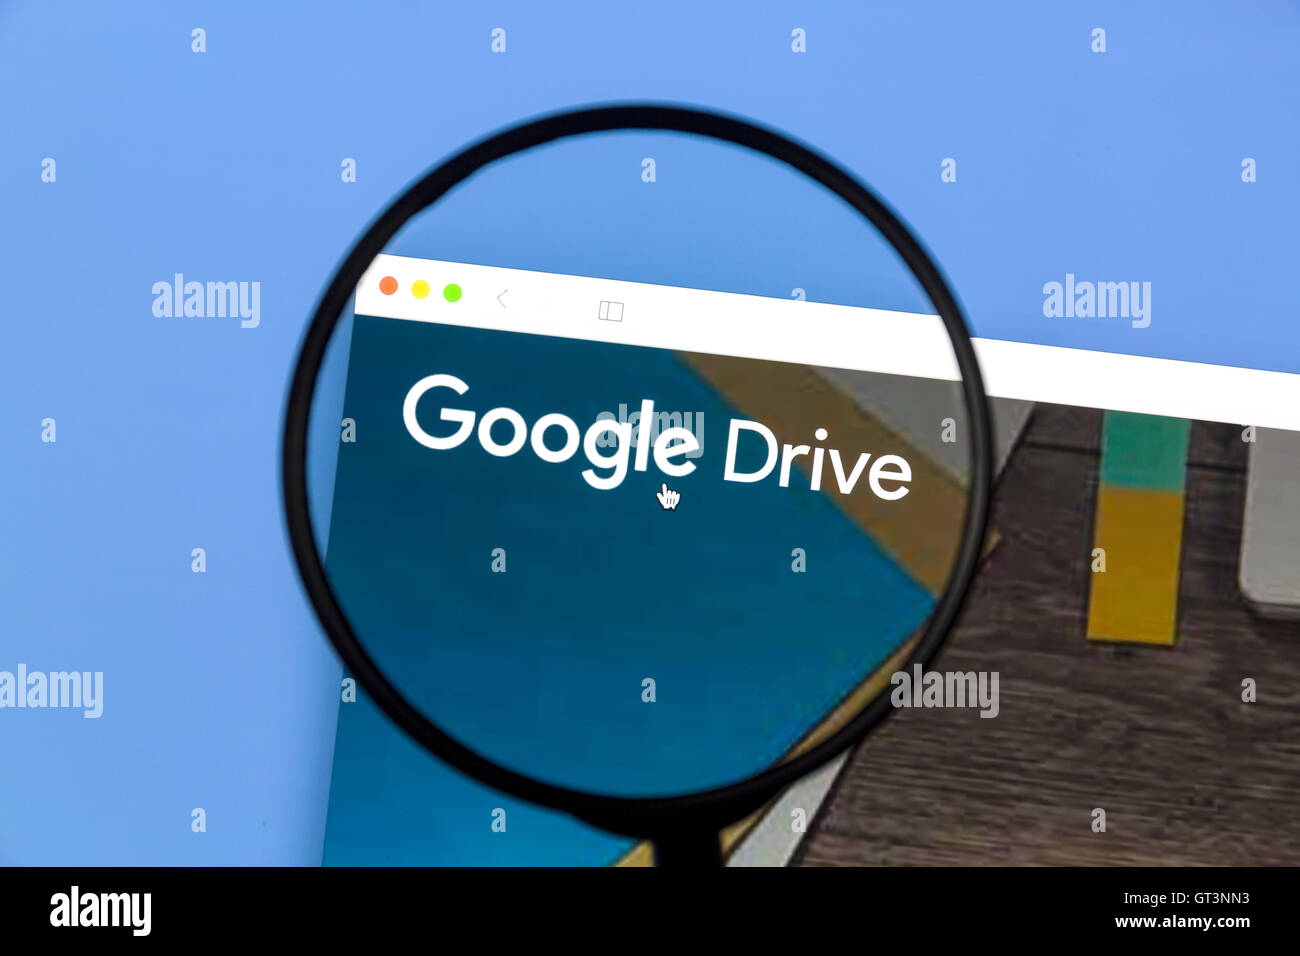 Google Drive under a magnifying glass Stock Photo